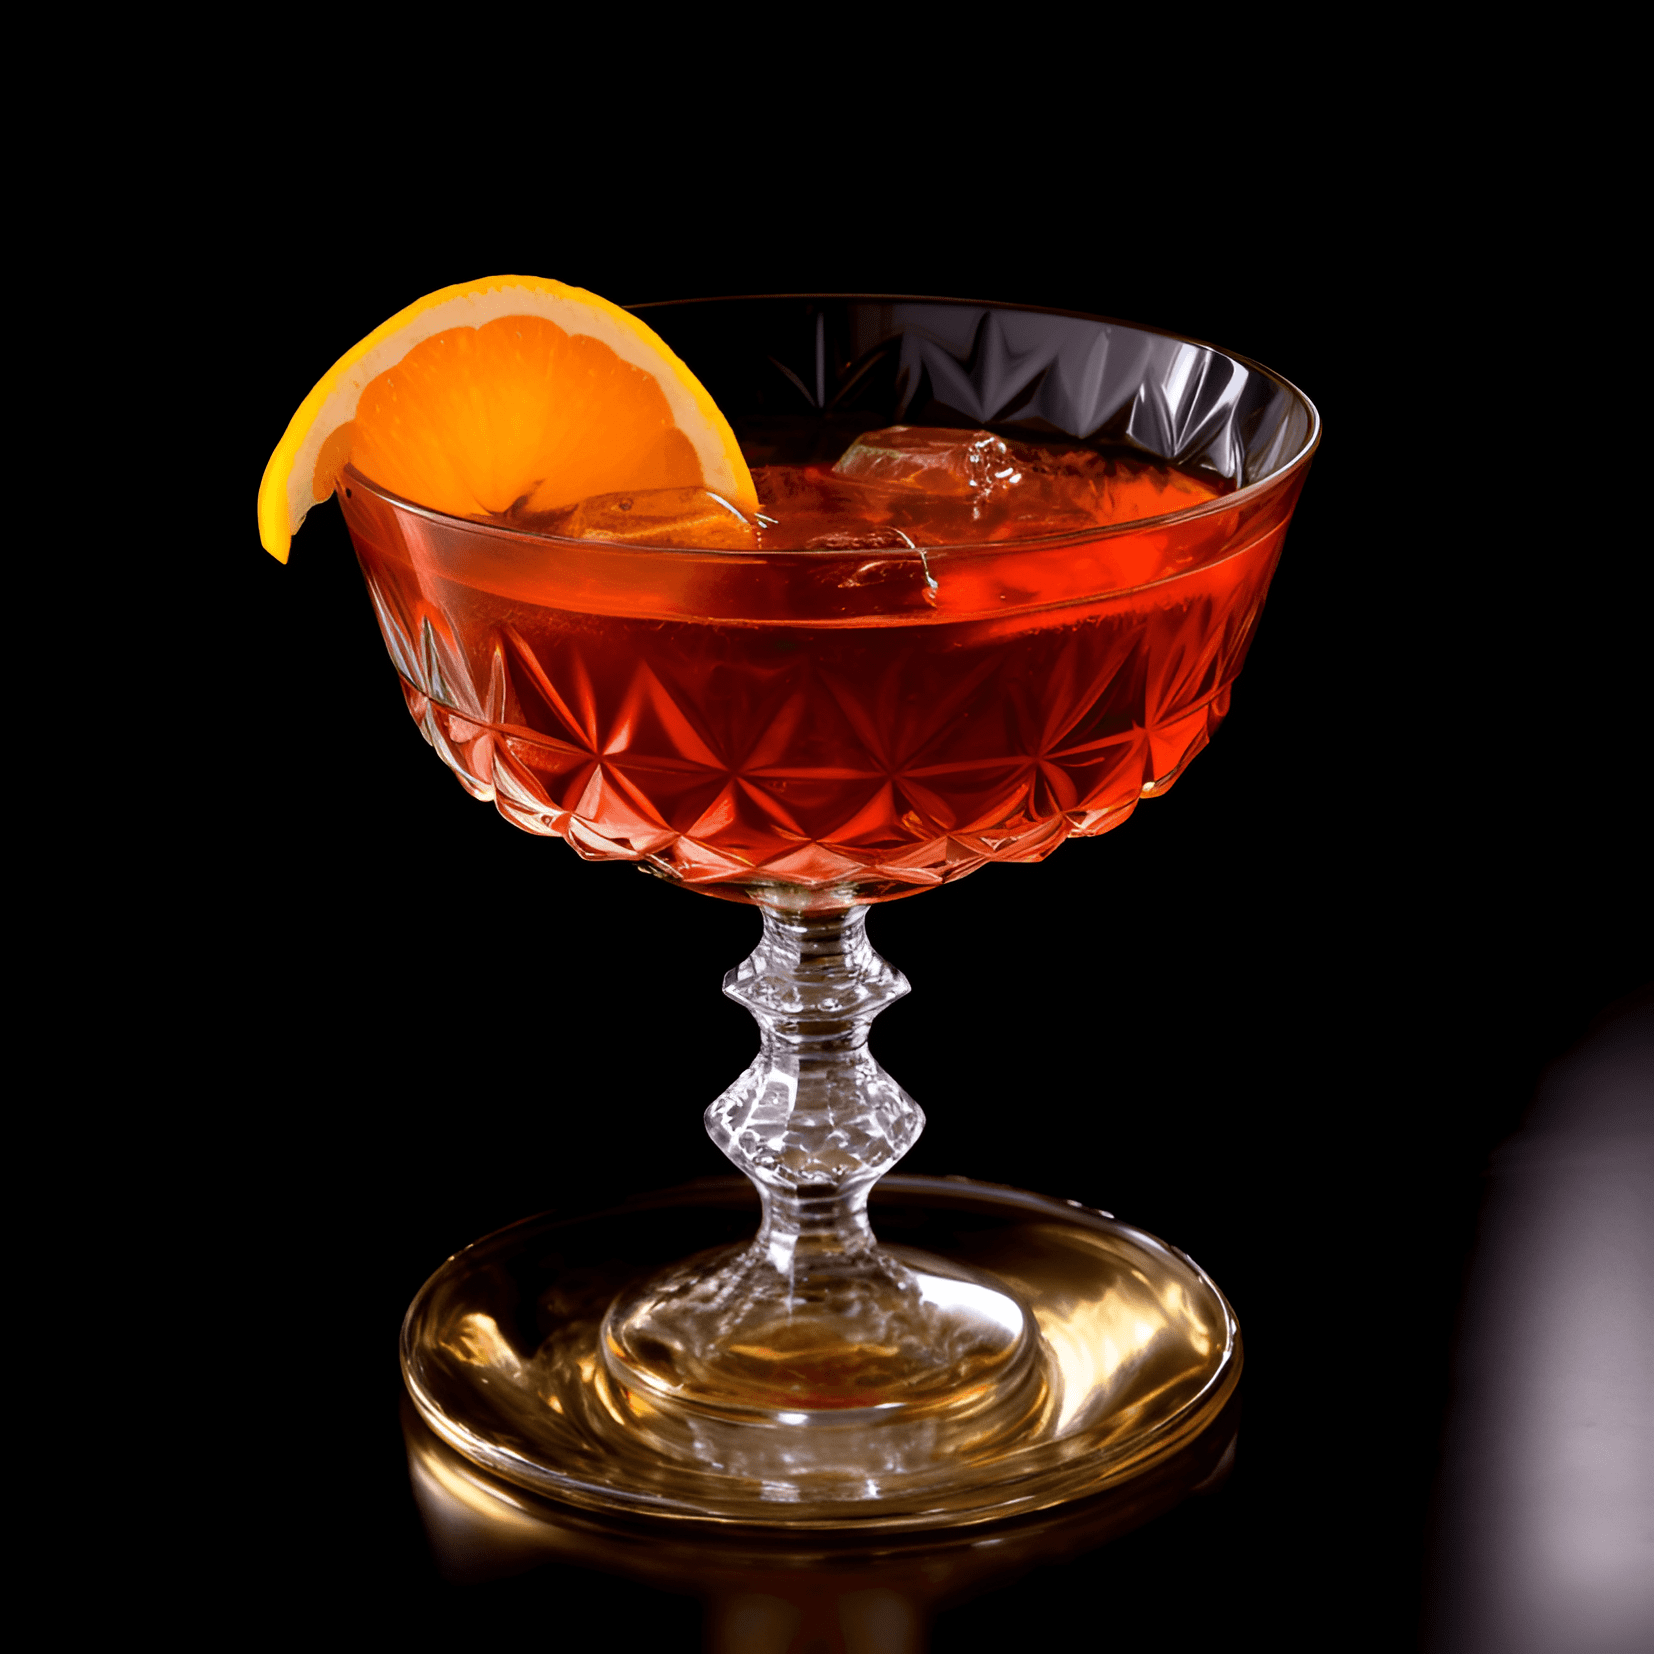 Napoleon Cocktail Recipe - The Napoleon cocktail has a complex, rich, and slightly sweet taste. It is well-balanced with notes of fruit, spice, and oak from the cognac, while the herbal and bitter flavors from the vermouth and Campari add depth and intrigue.